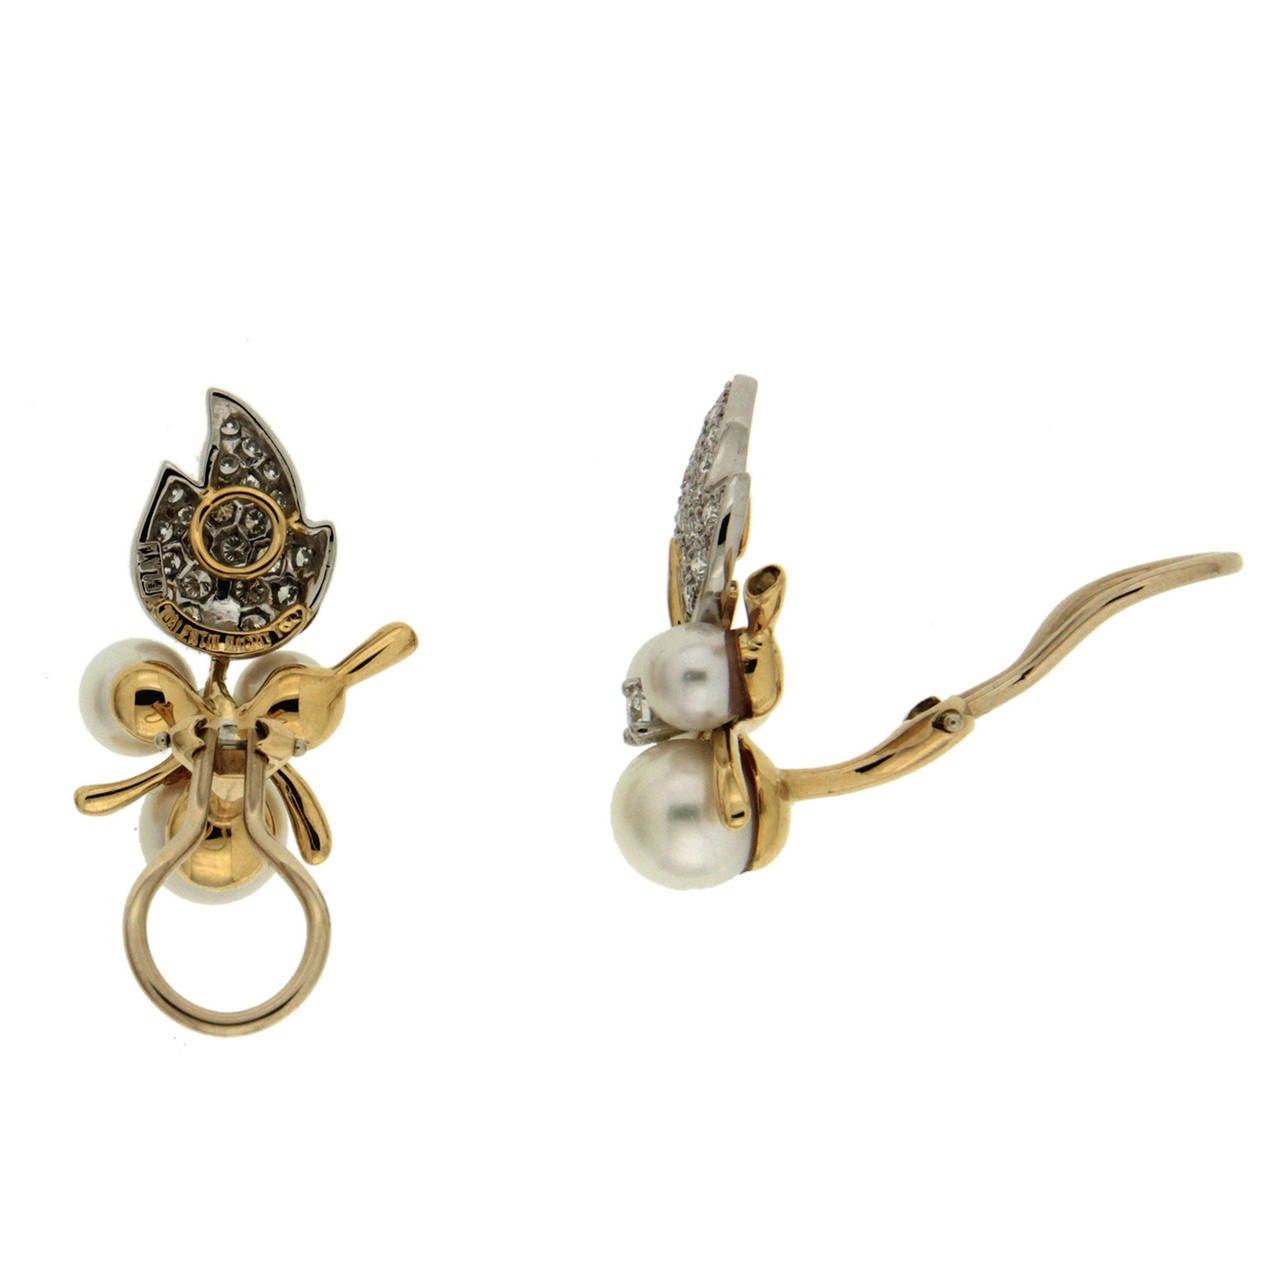 This pair of Single Pave Leaf Earrings with round brilliant diamonds and Pearl cluster is made in 18K Yellow Gold and Platinum.
Diamonds total weight 1.14 ct